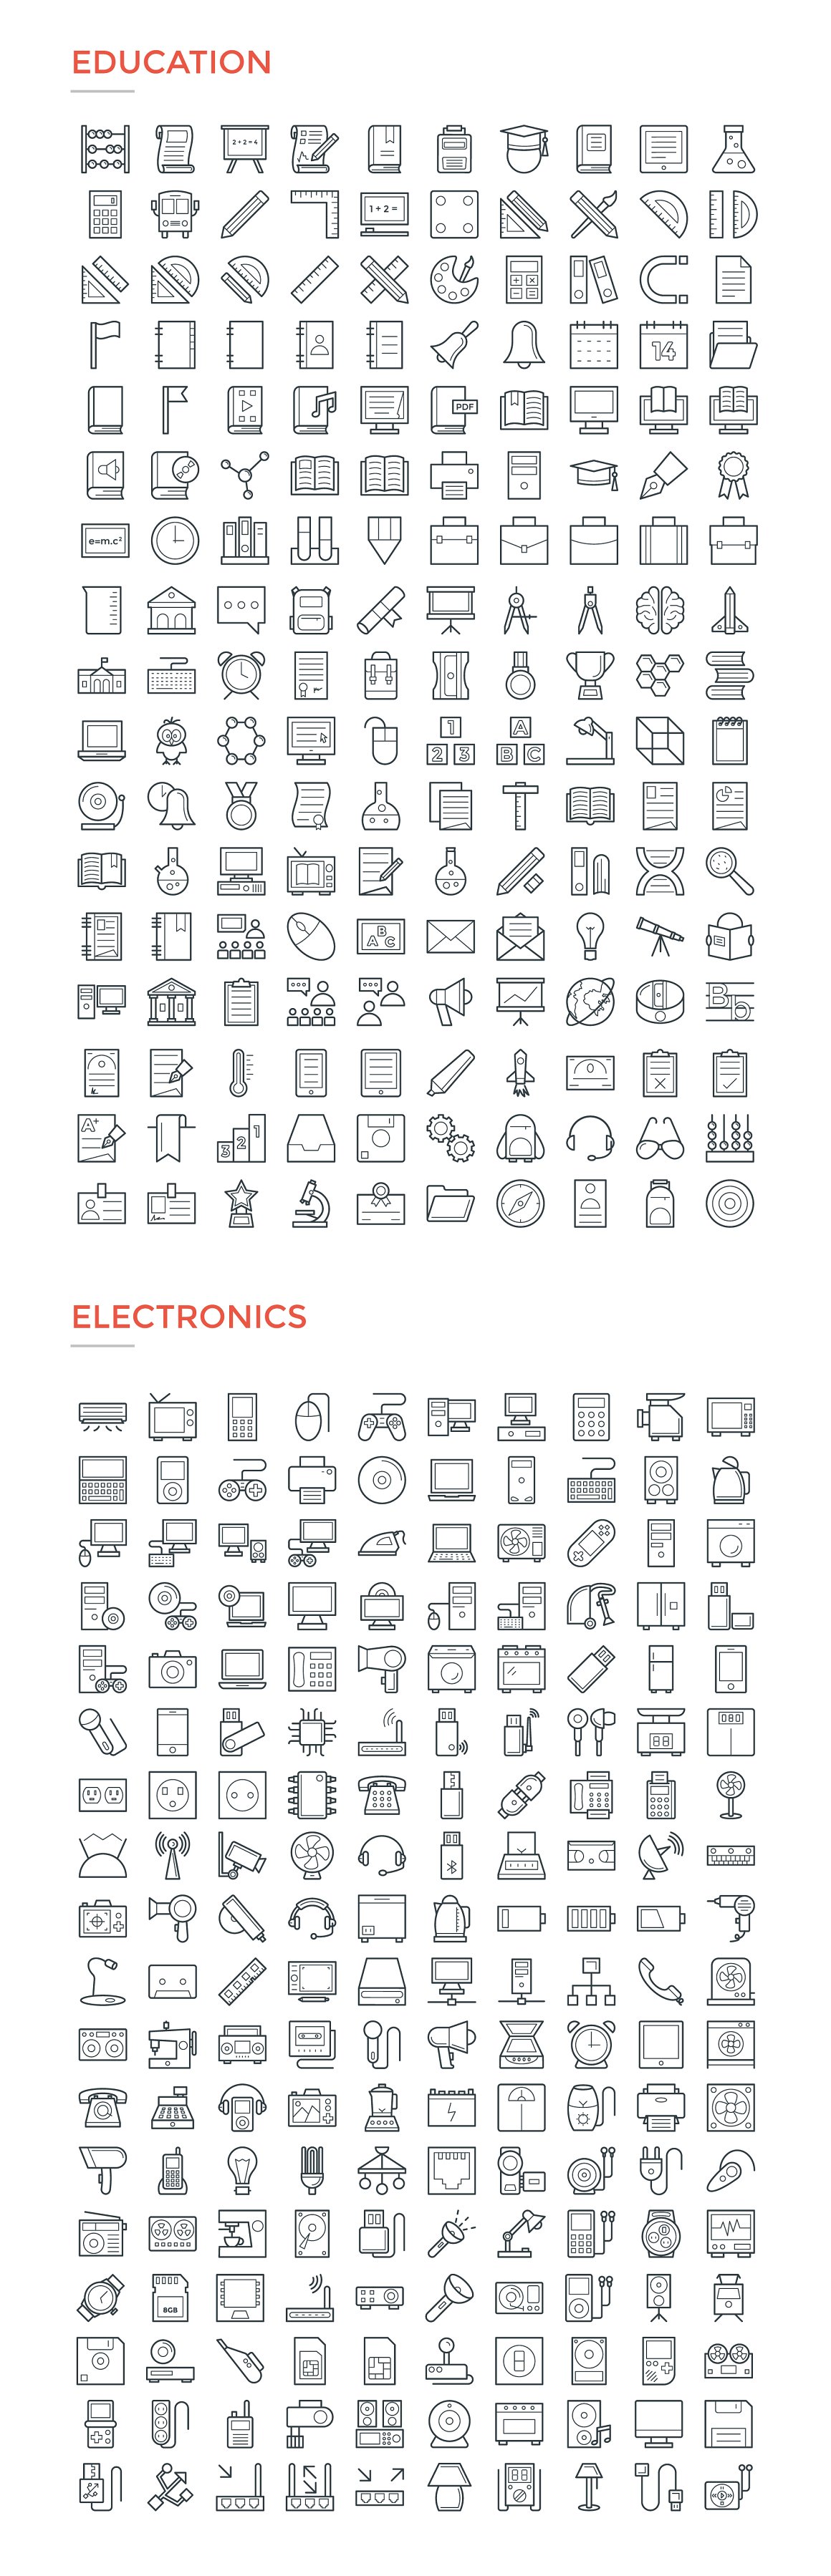 Black line kit of education and electronics icons on a white background.